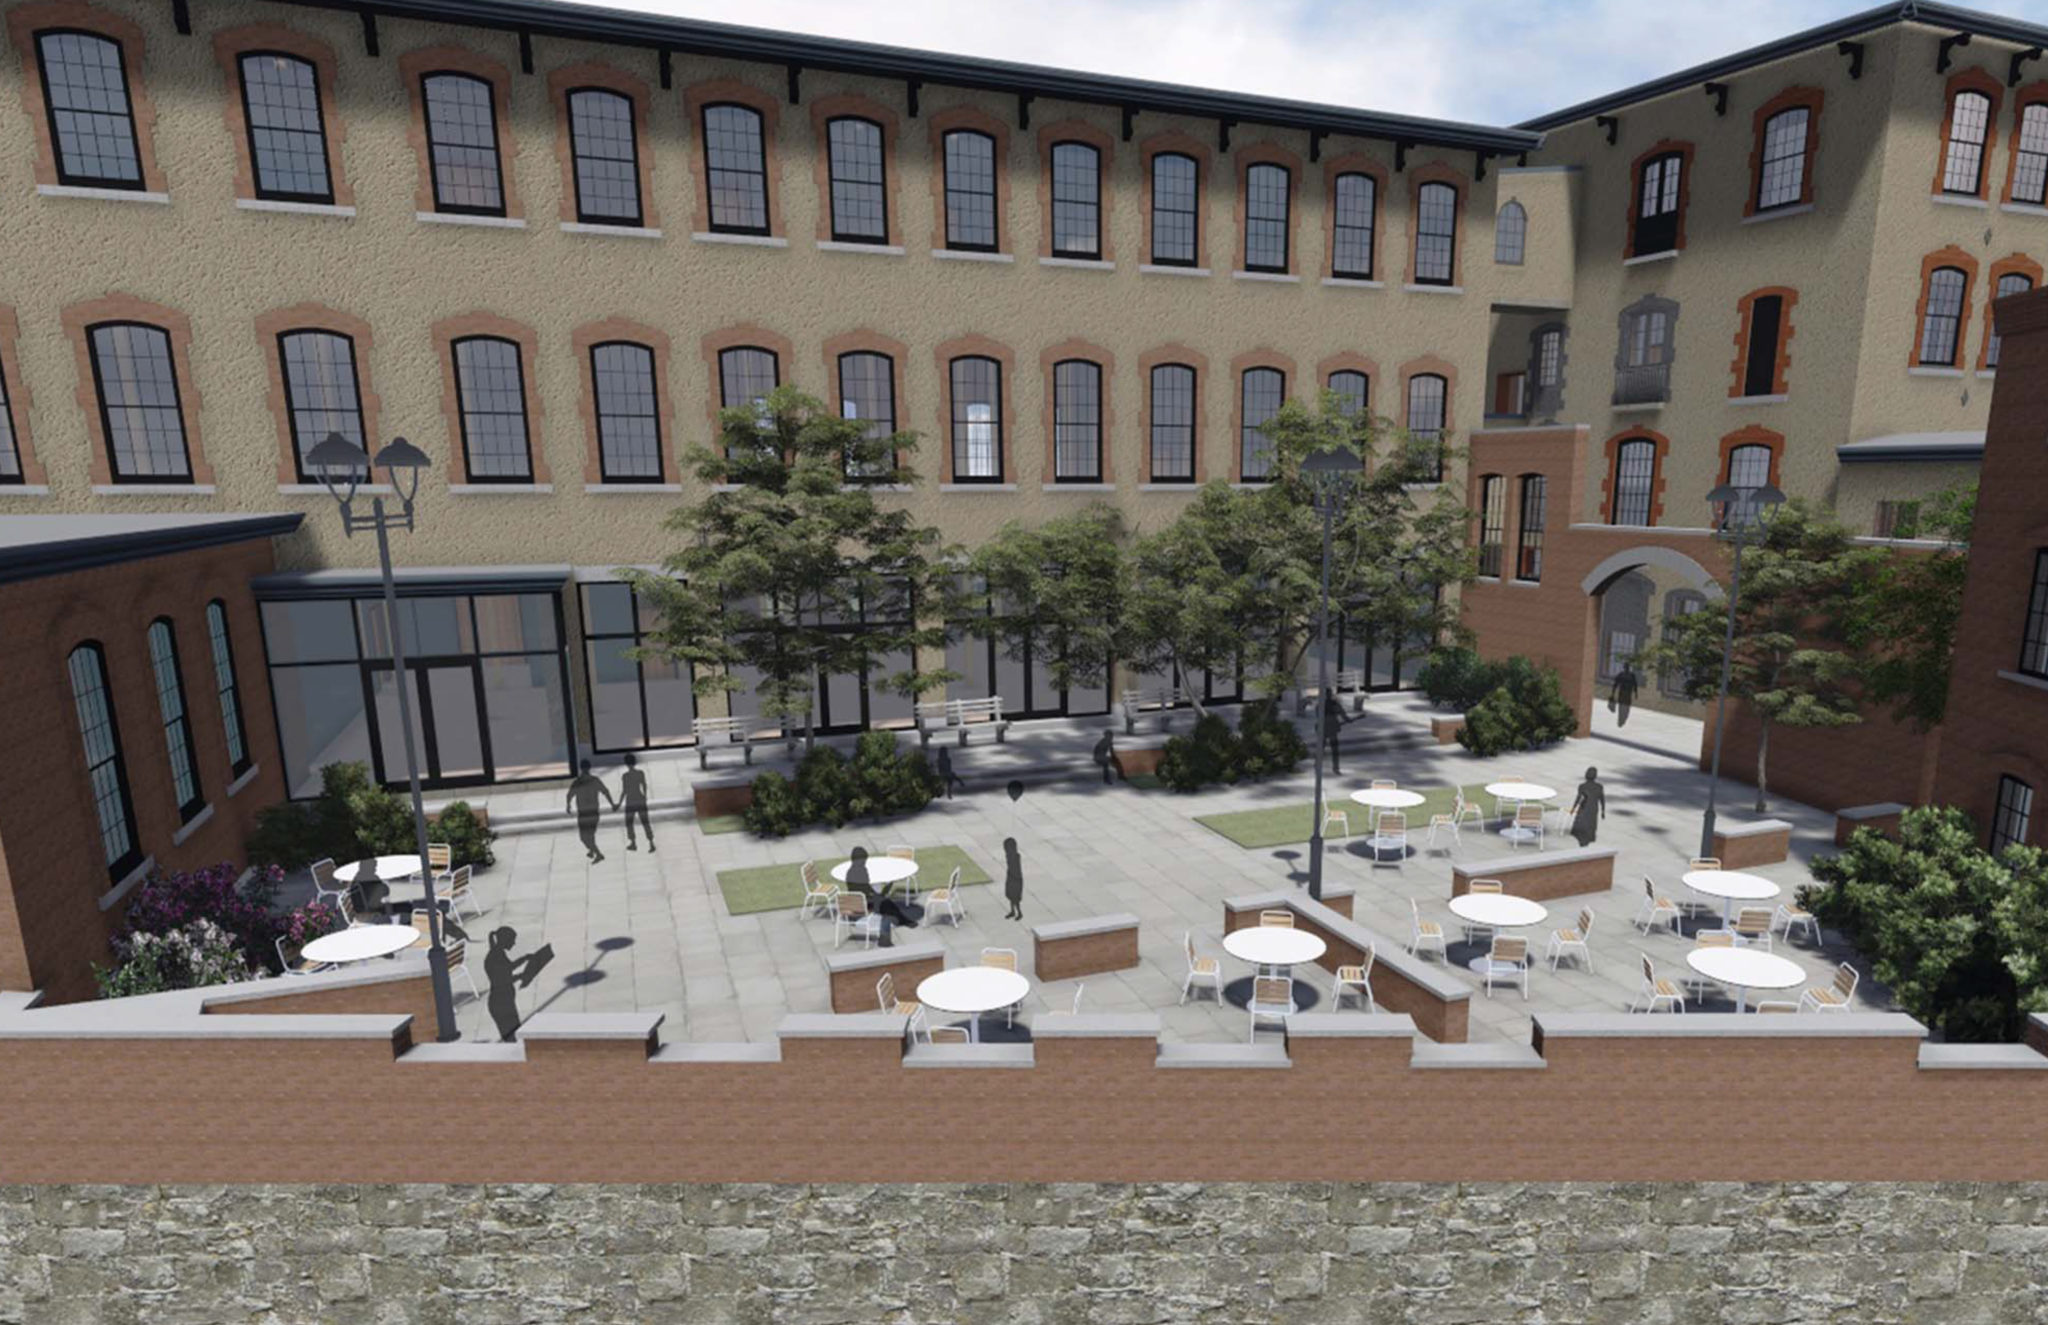 THE WASHINGTON TRUST CO. recently provided $23.6 million to finance the mixed-use redevelopment of Pontiac Mills in Warwick, shown by the rendering above. / COURTESY WASHINGTON TRUST